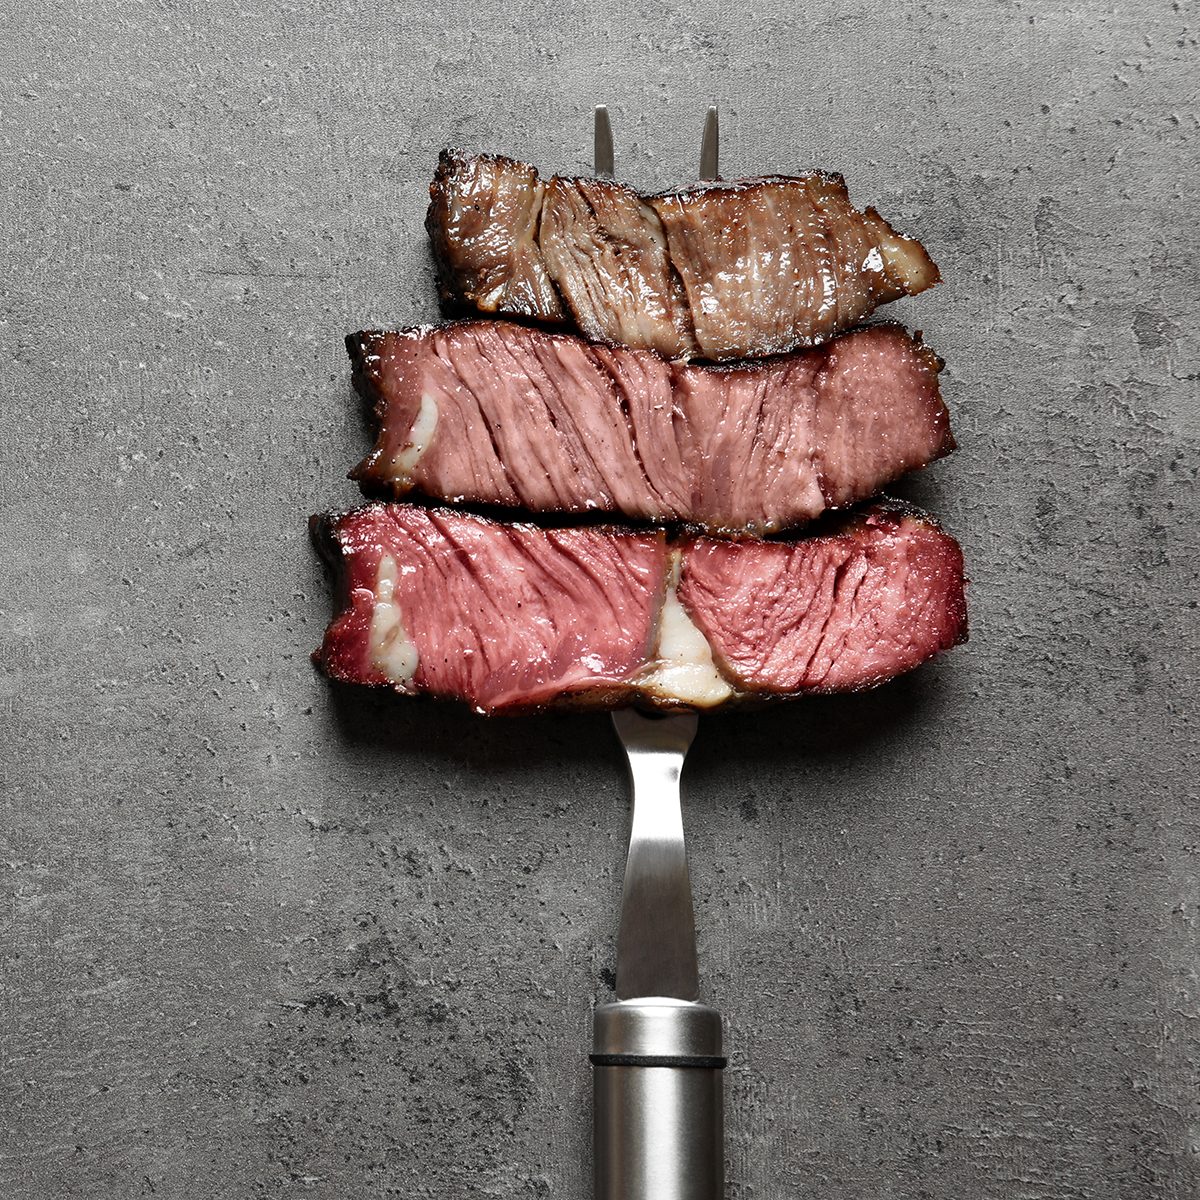 The Best Gear for Cooking a Restaurant-Quality Steak at Home